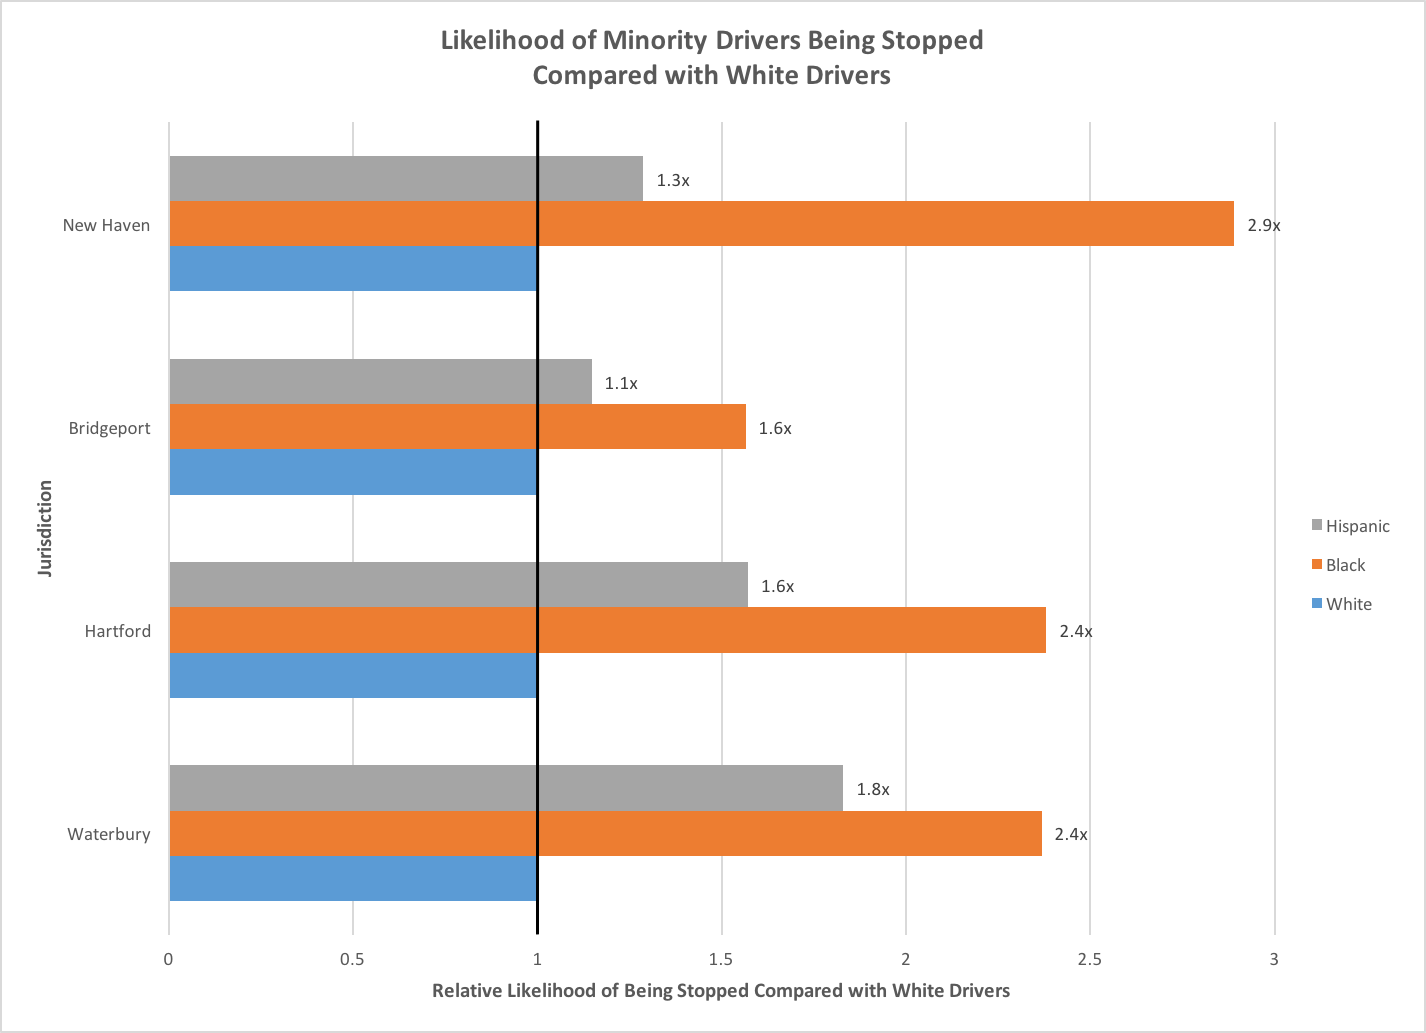 Likelihood of Minority Drivers Being Stopped, Compared to White Drivers